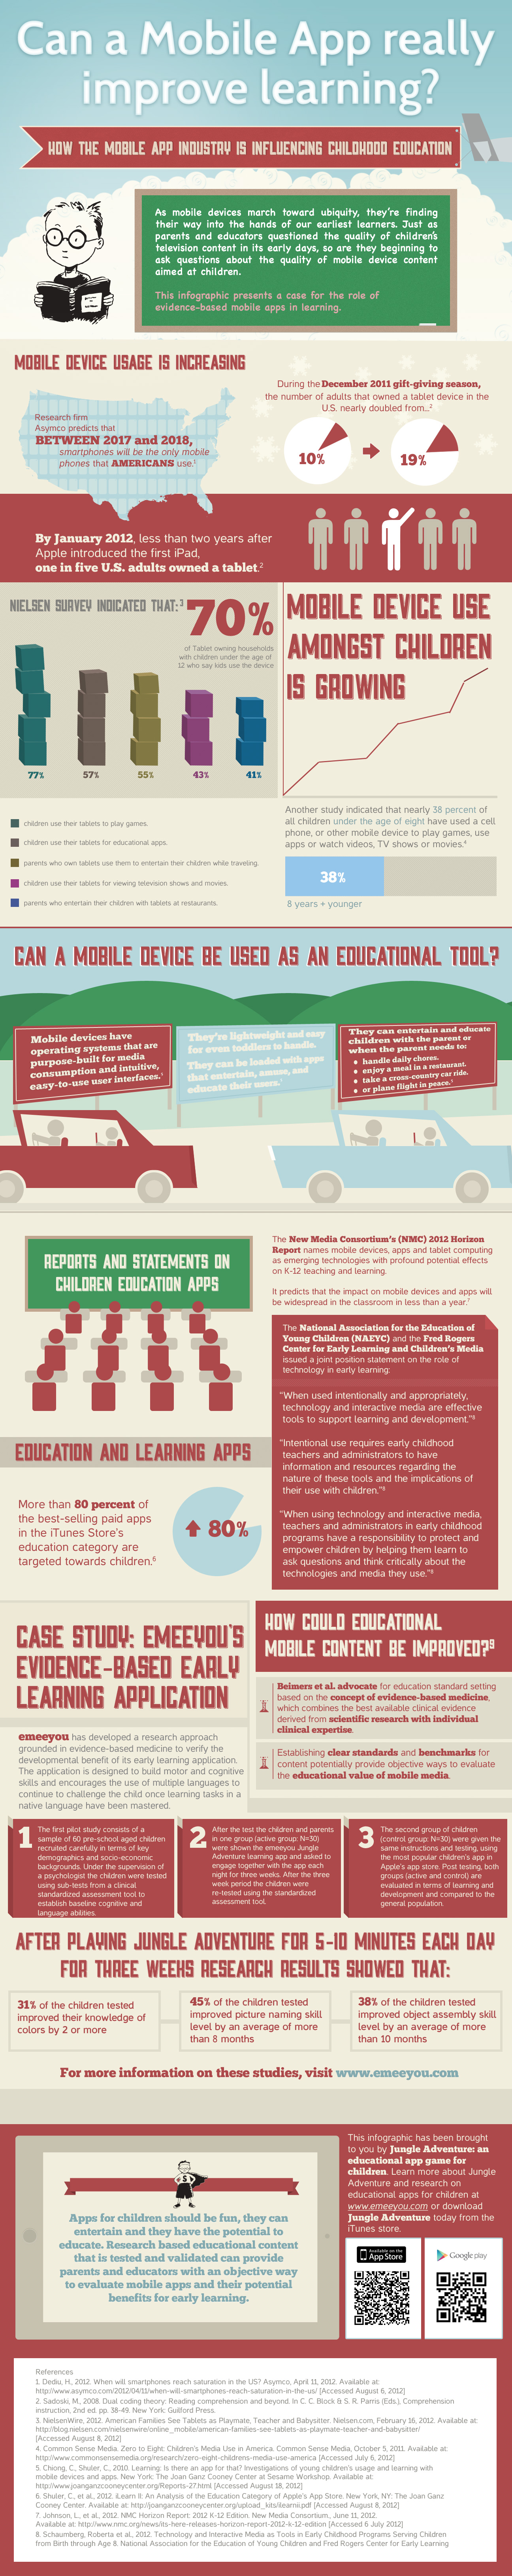 Can a Mobile App really improve learning